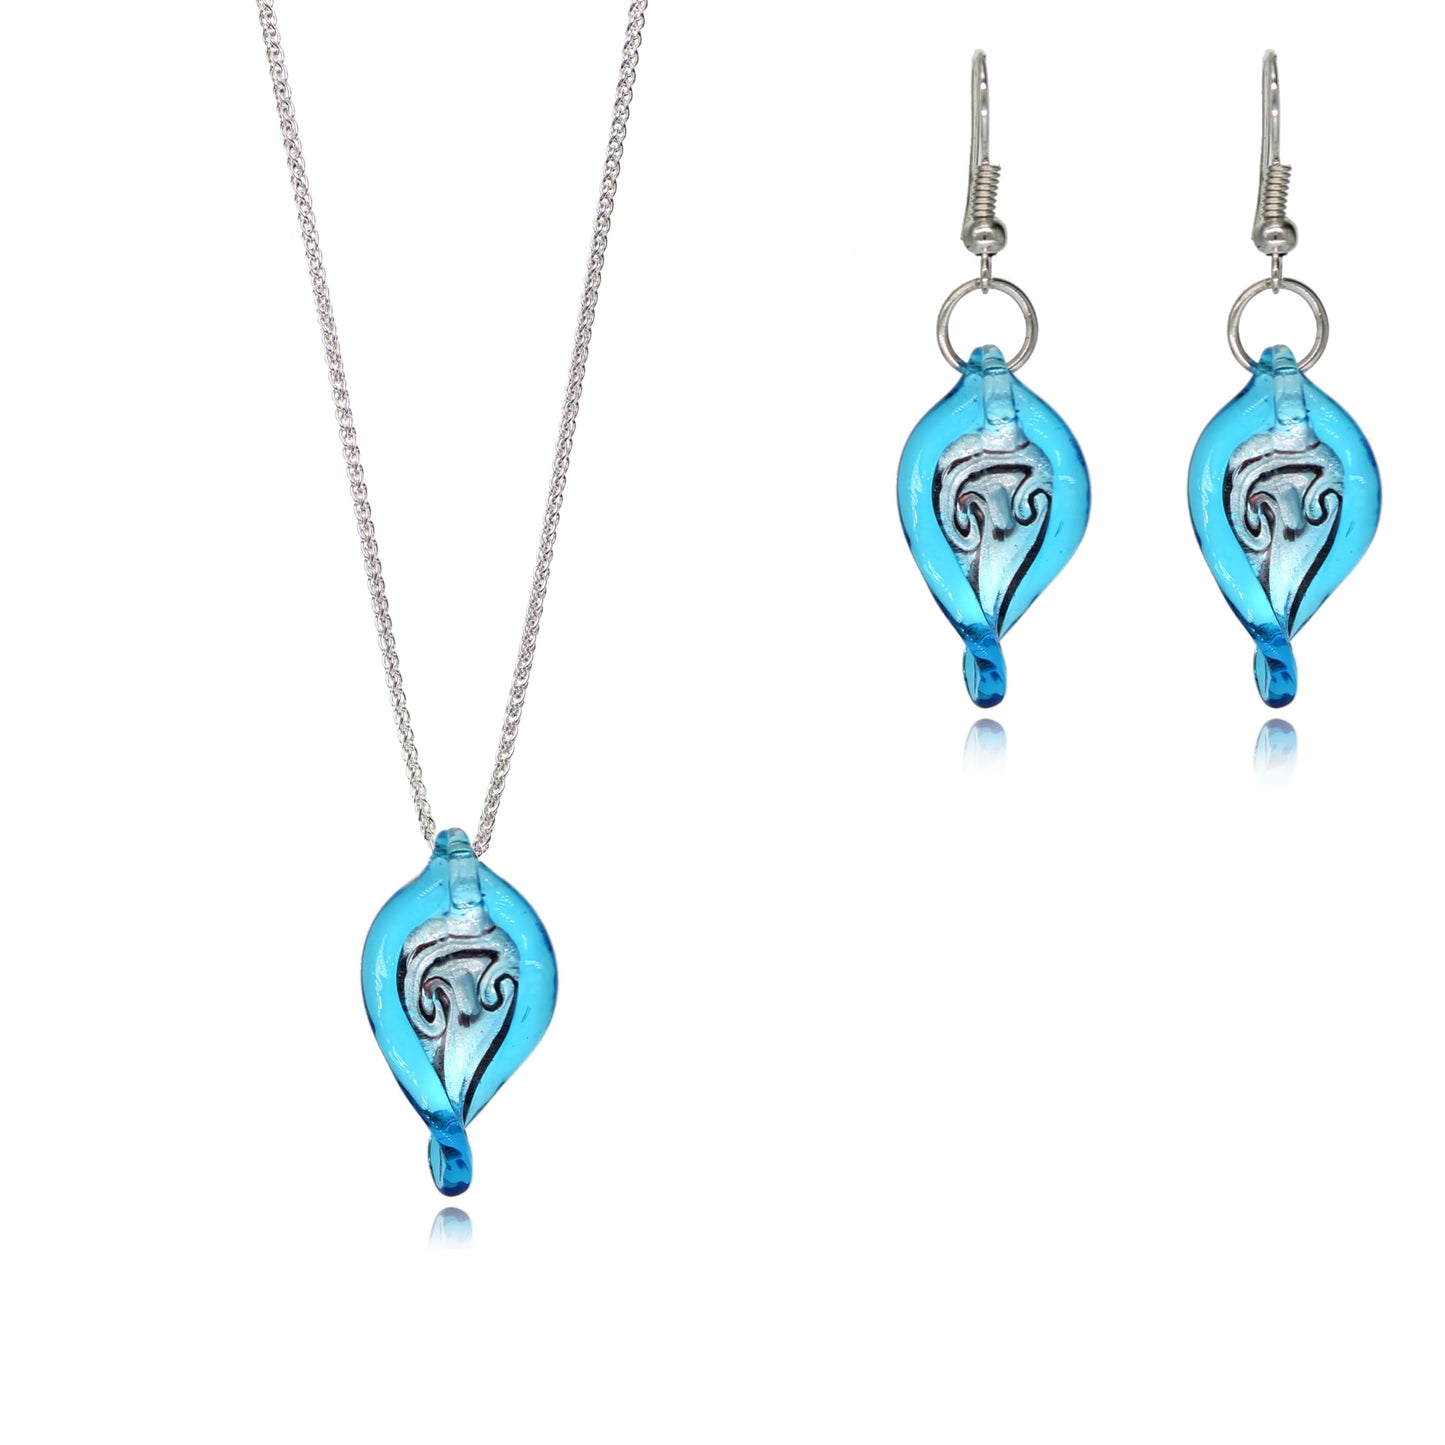 Sterling Silver Aqua Blue Leaf Glass Earrings and Necklace Pendant Set Hypoallergenic Italian Style Jewelry